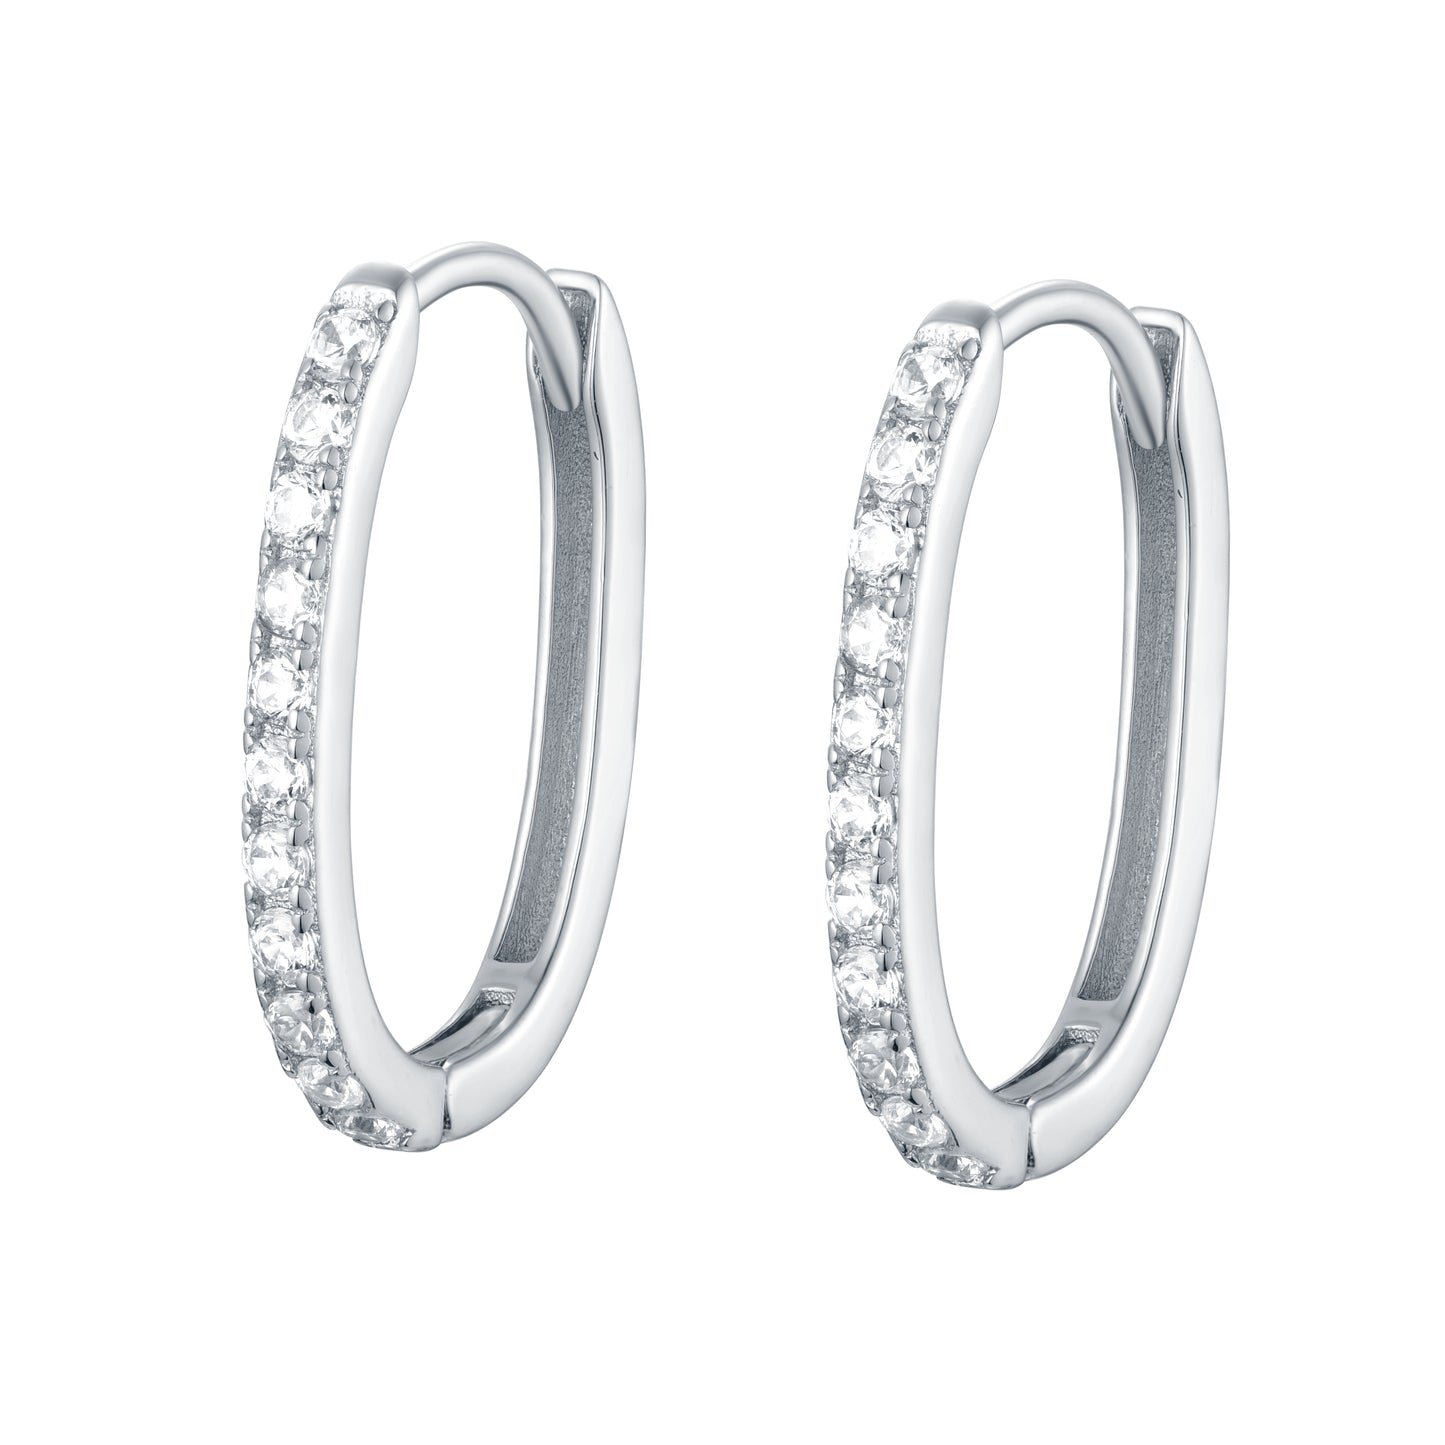 EG-16/S - Slightly Squared Hoop Earrings with Cubic Zirconia